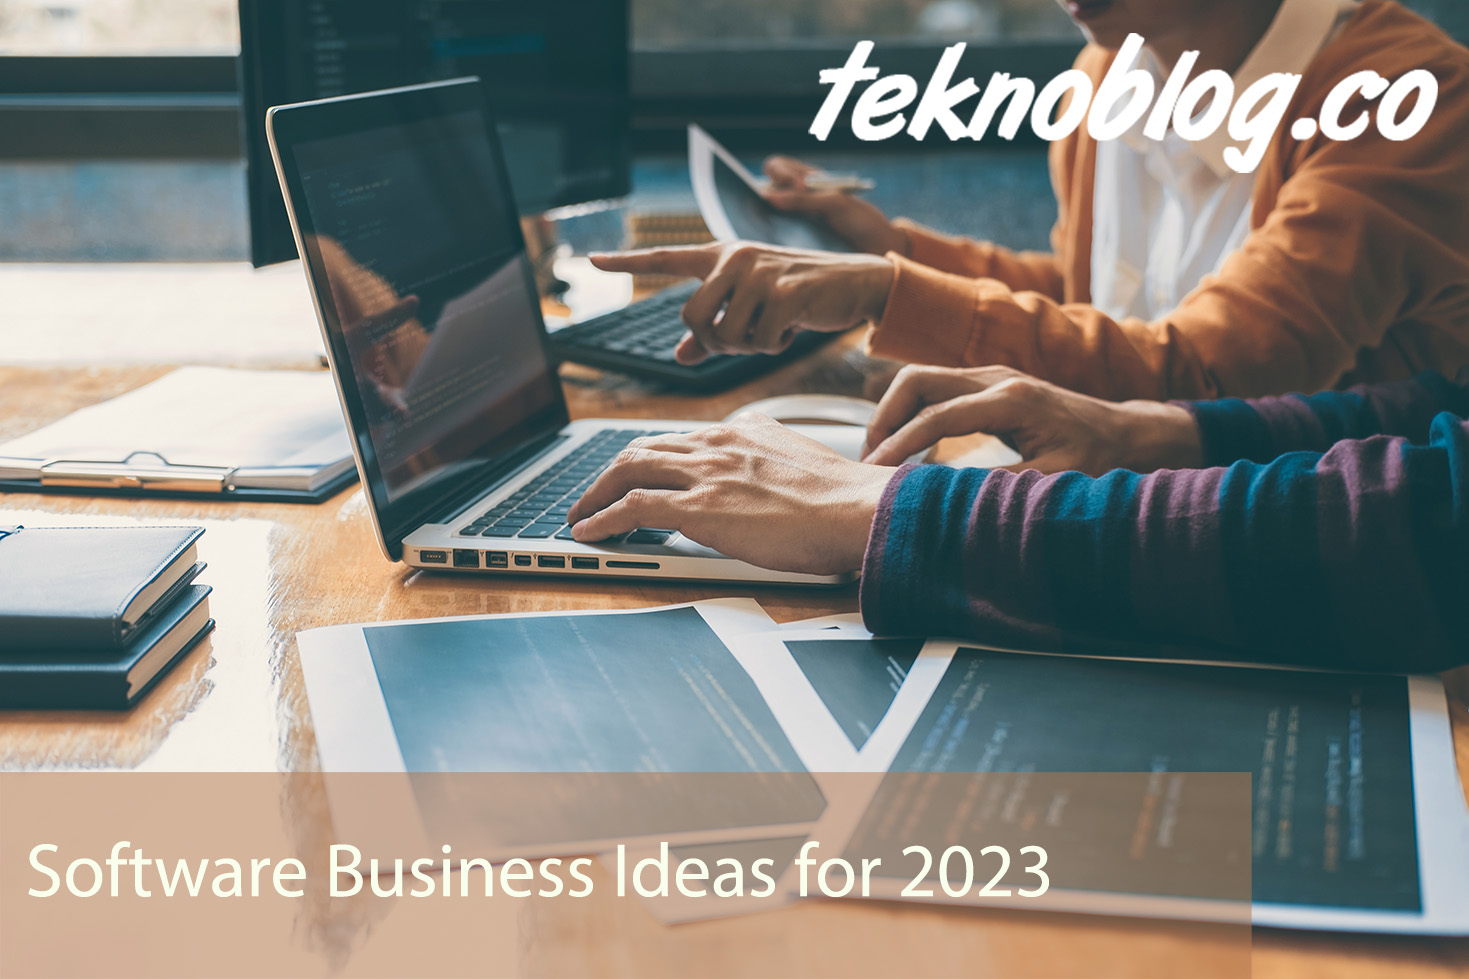 Software Business Ideas for 2023